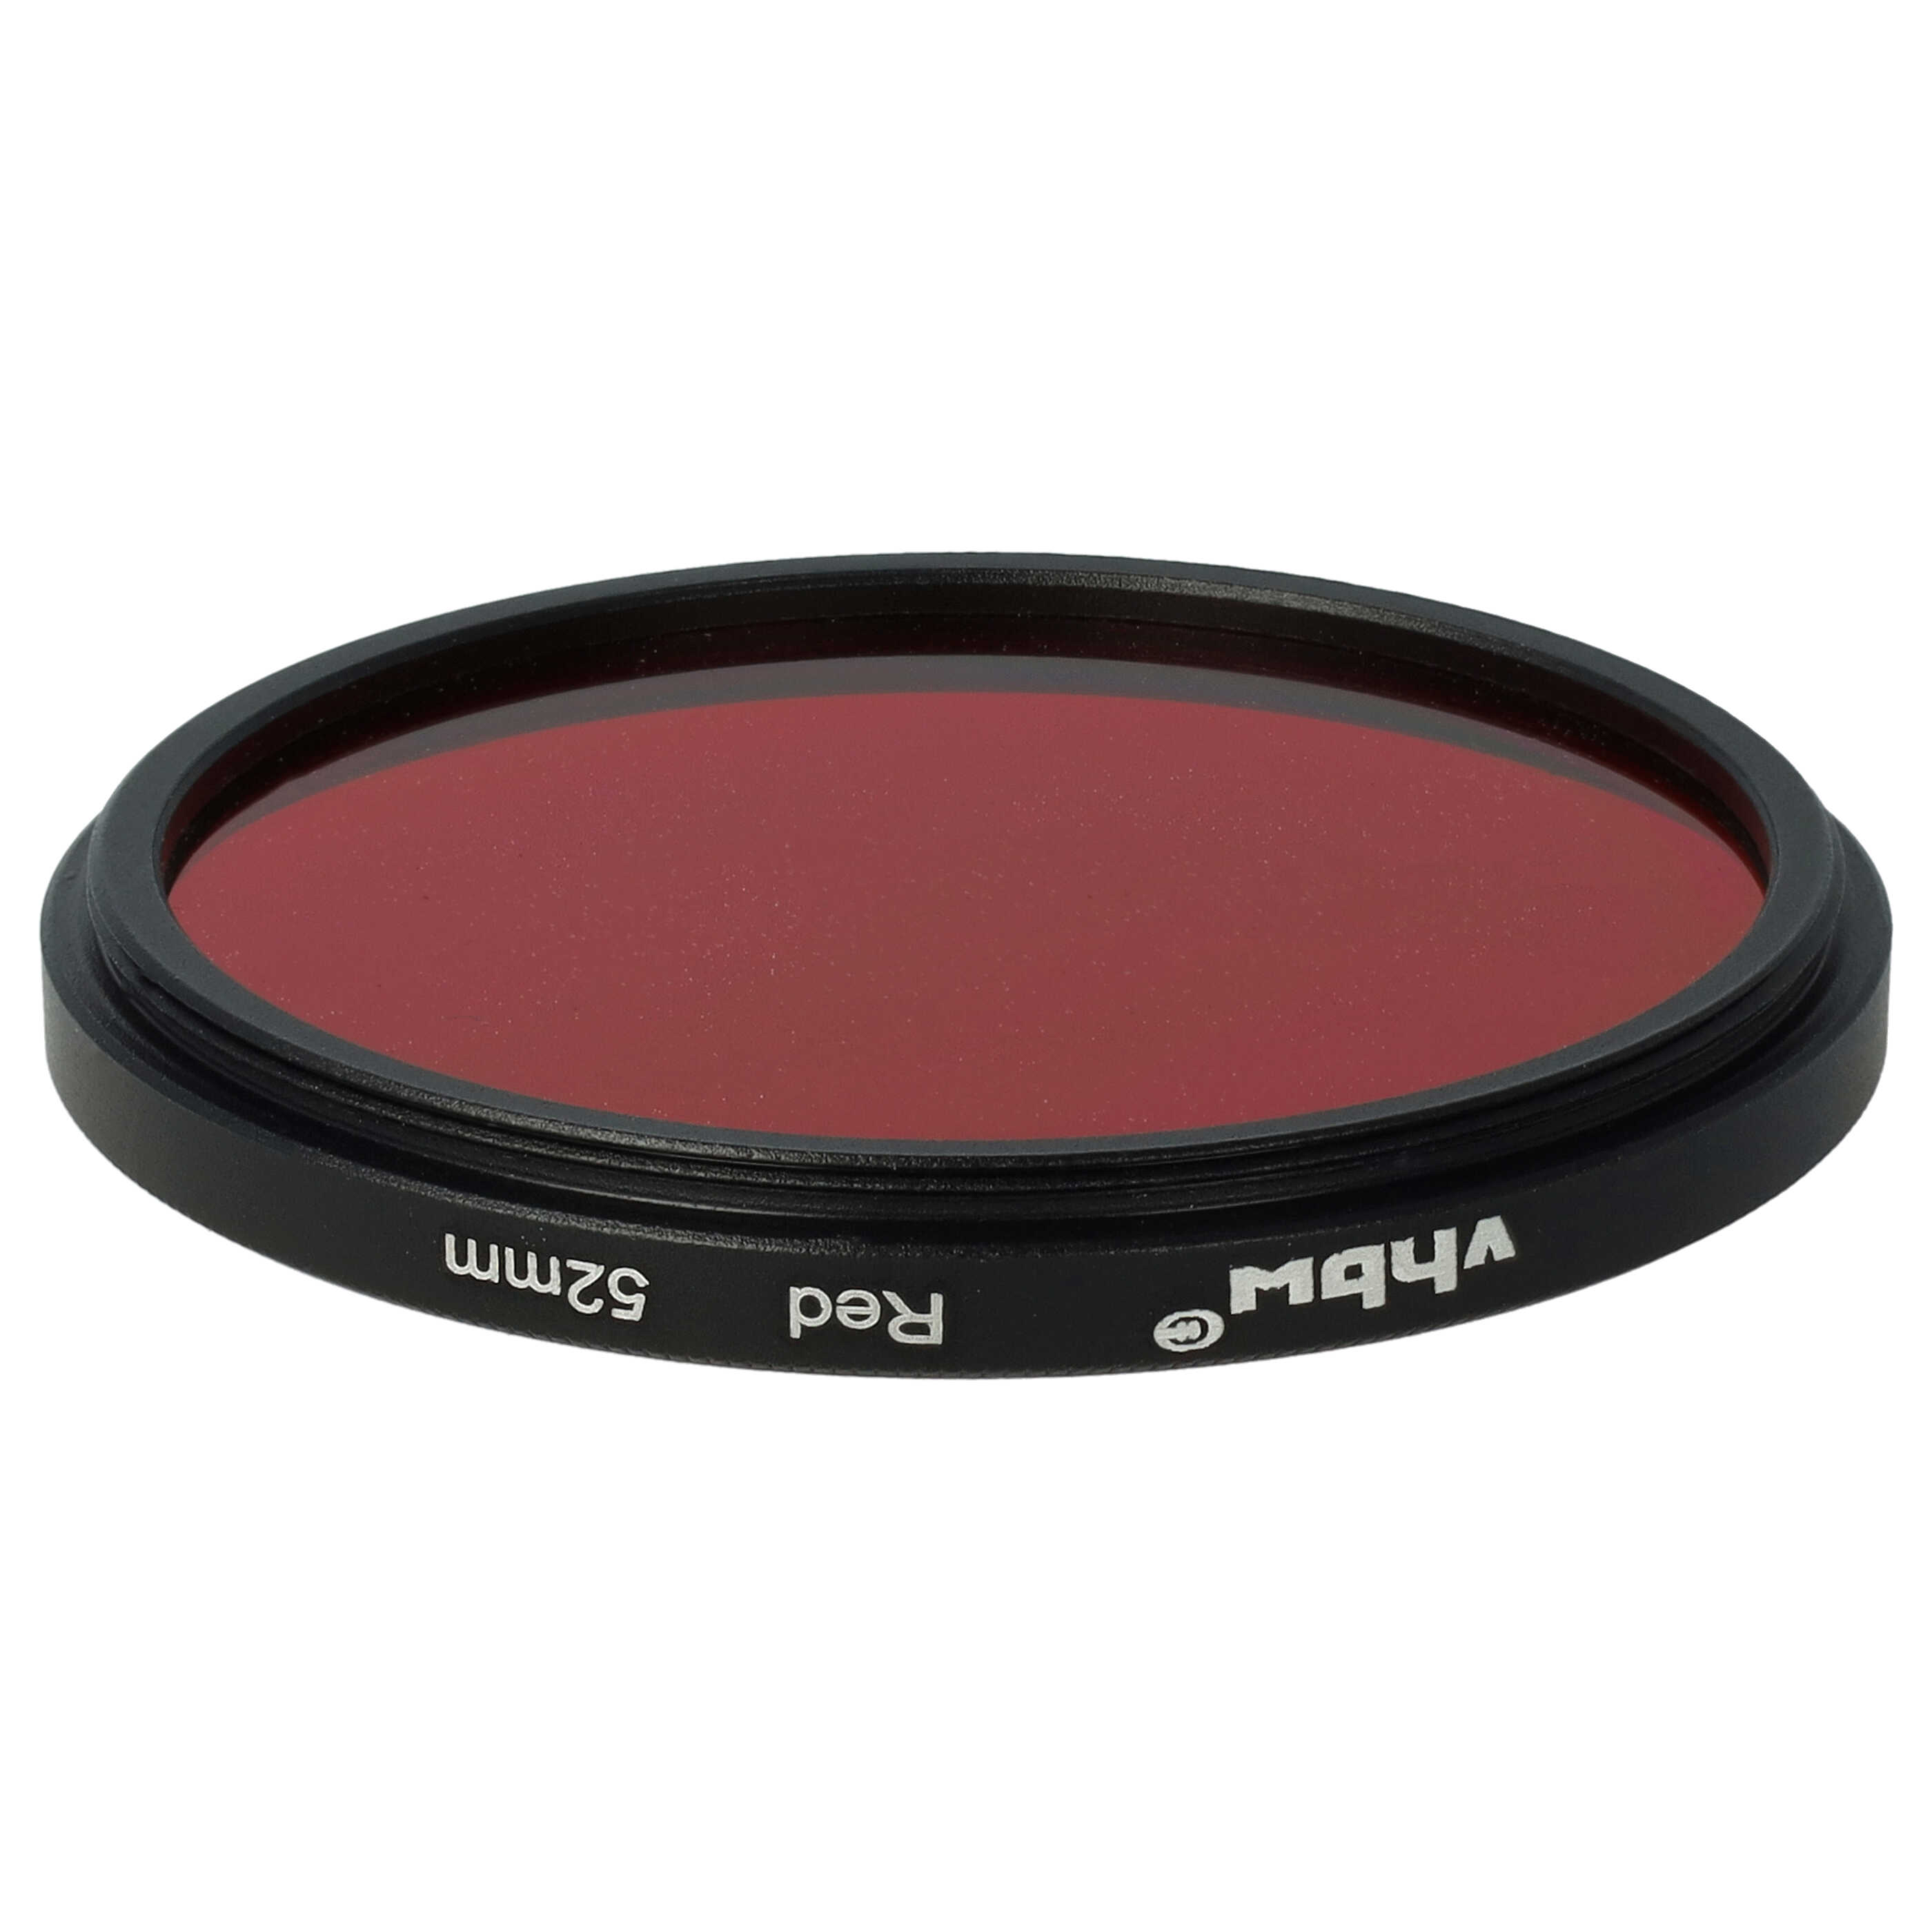 Coloured Filter, Red suitable for Camera Lenses with 52 mm Filter Thread - Red Filter